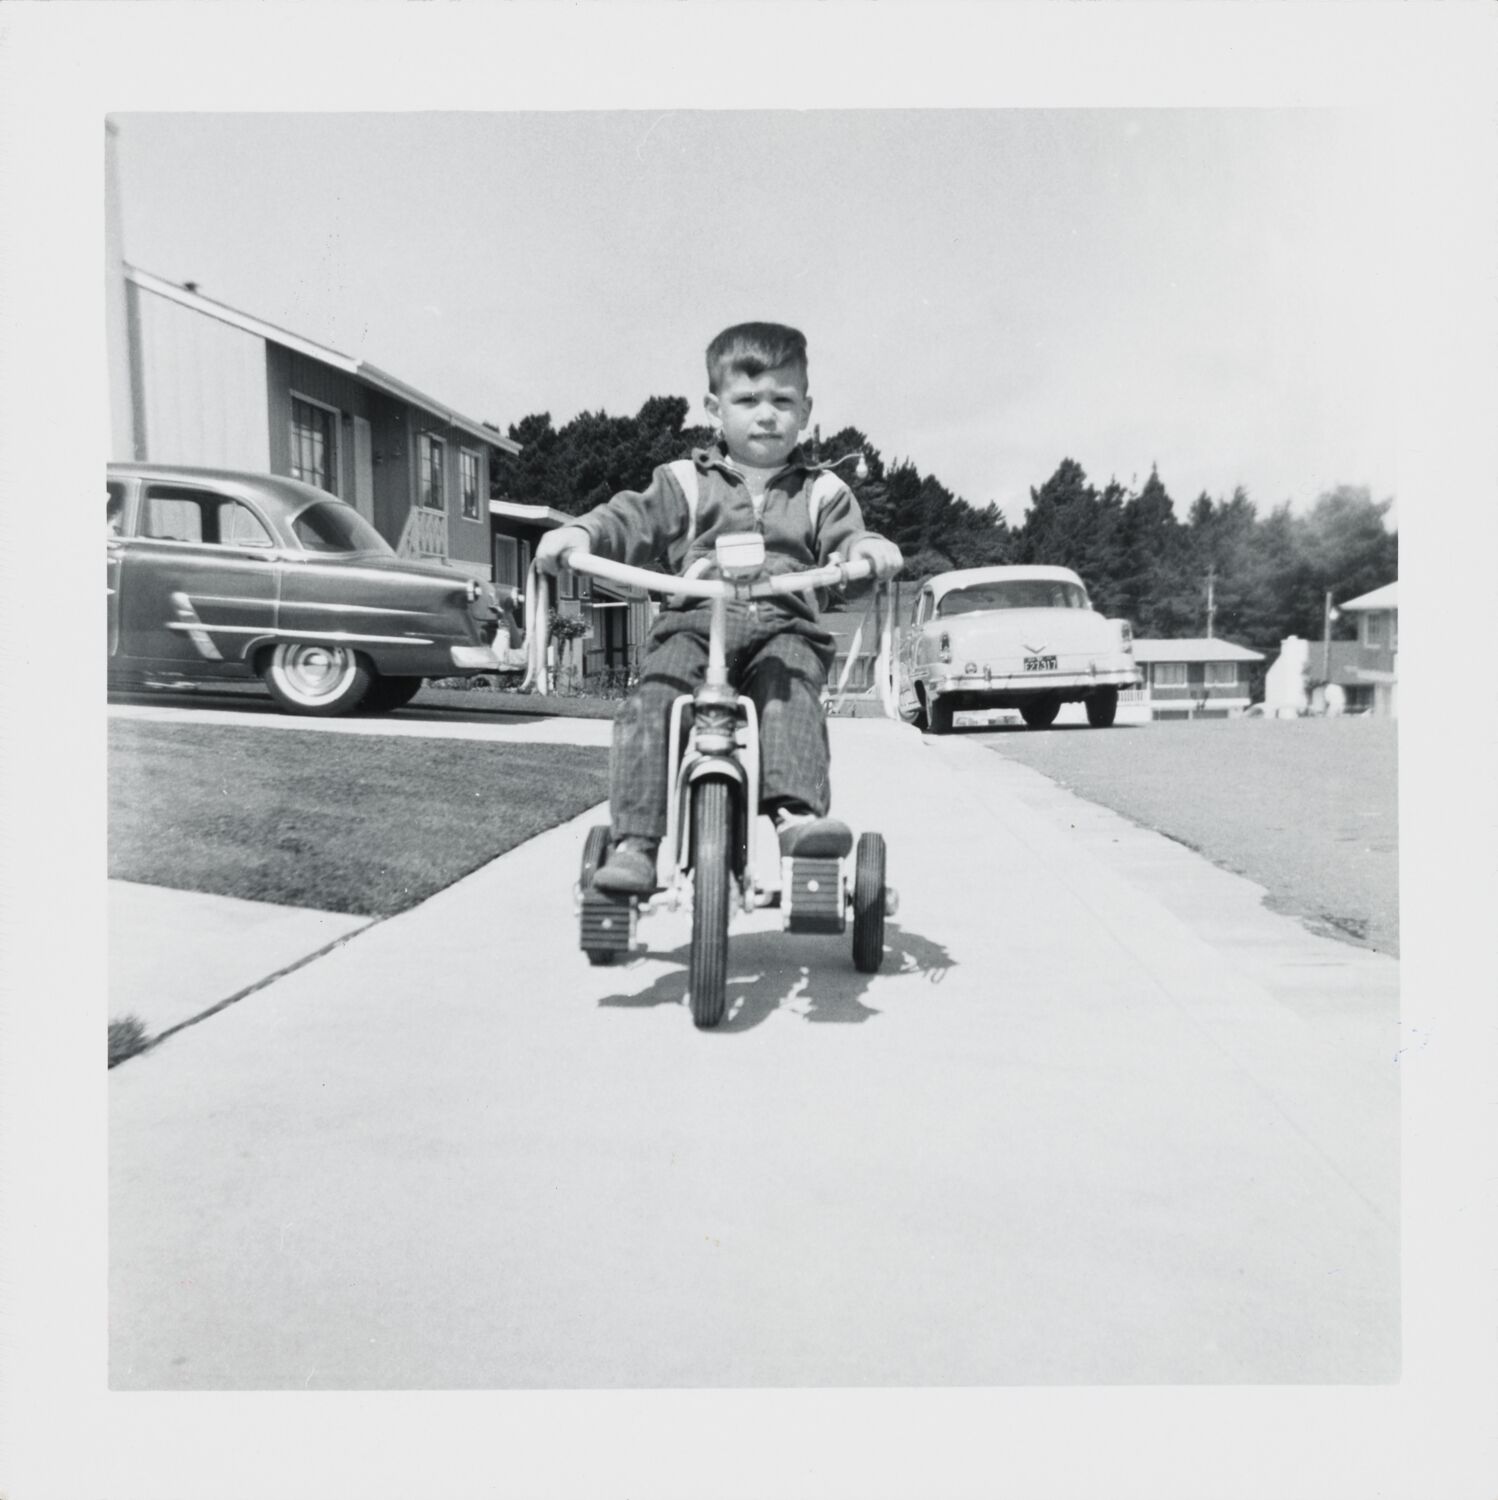 Two-year-old Steve rides a tricycle with tassels on the handlebars toward the camera.